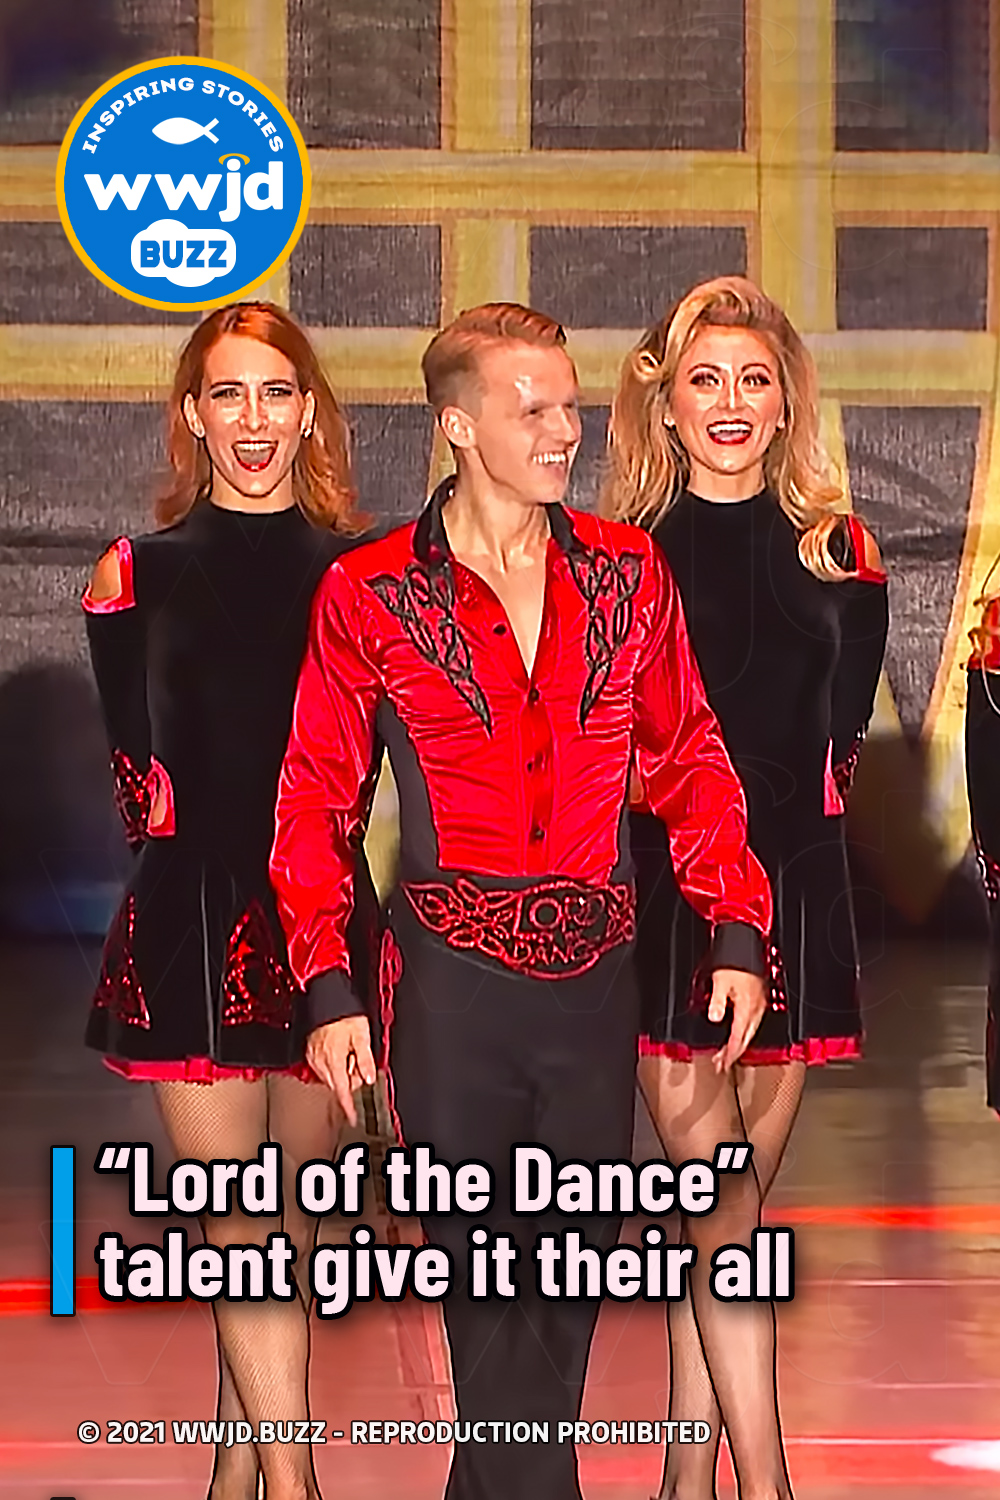 “Lord of the Dance” talent give it their all